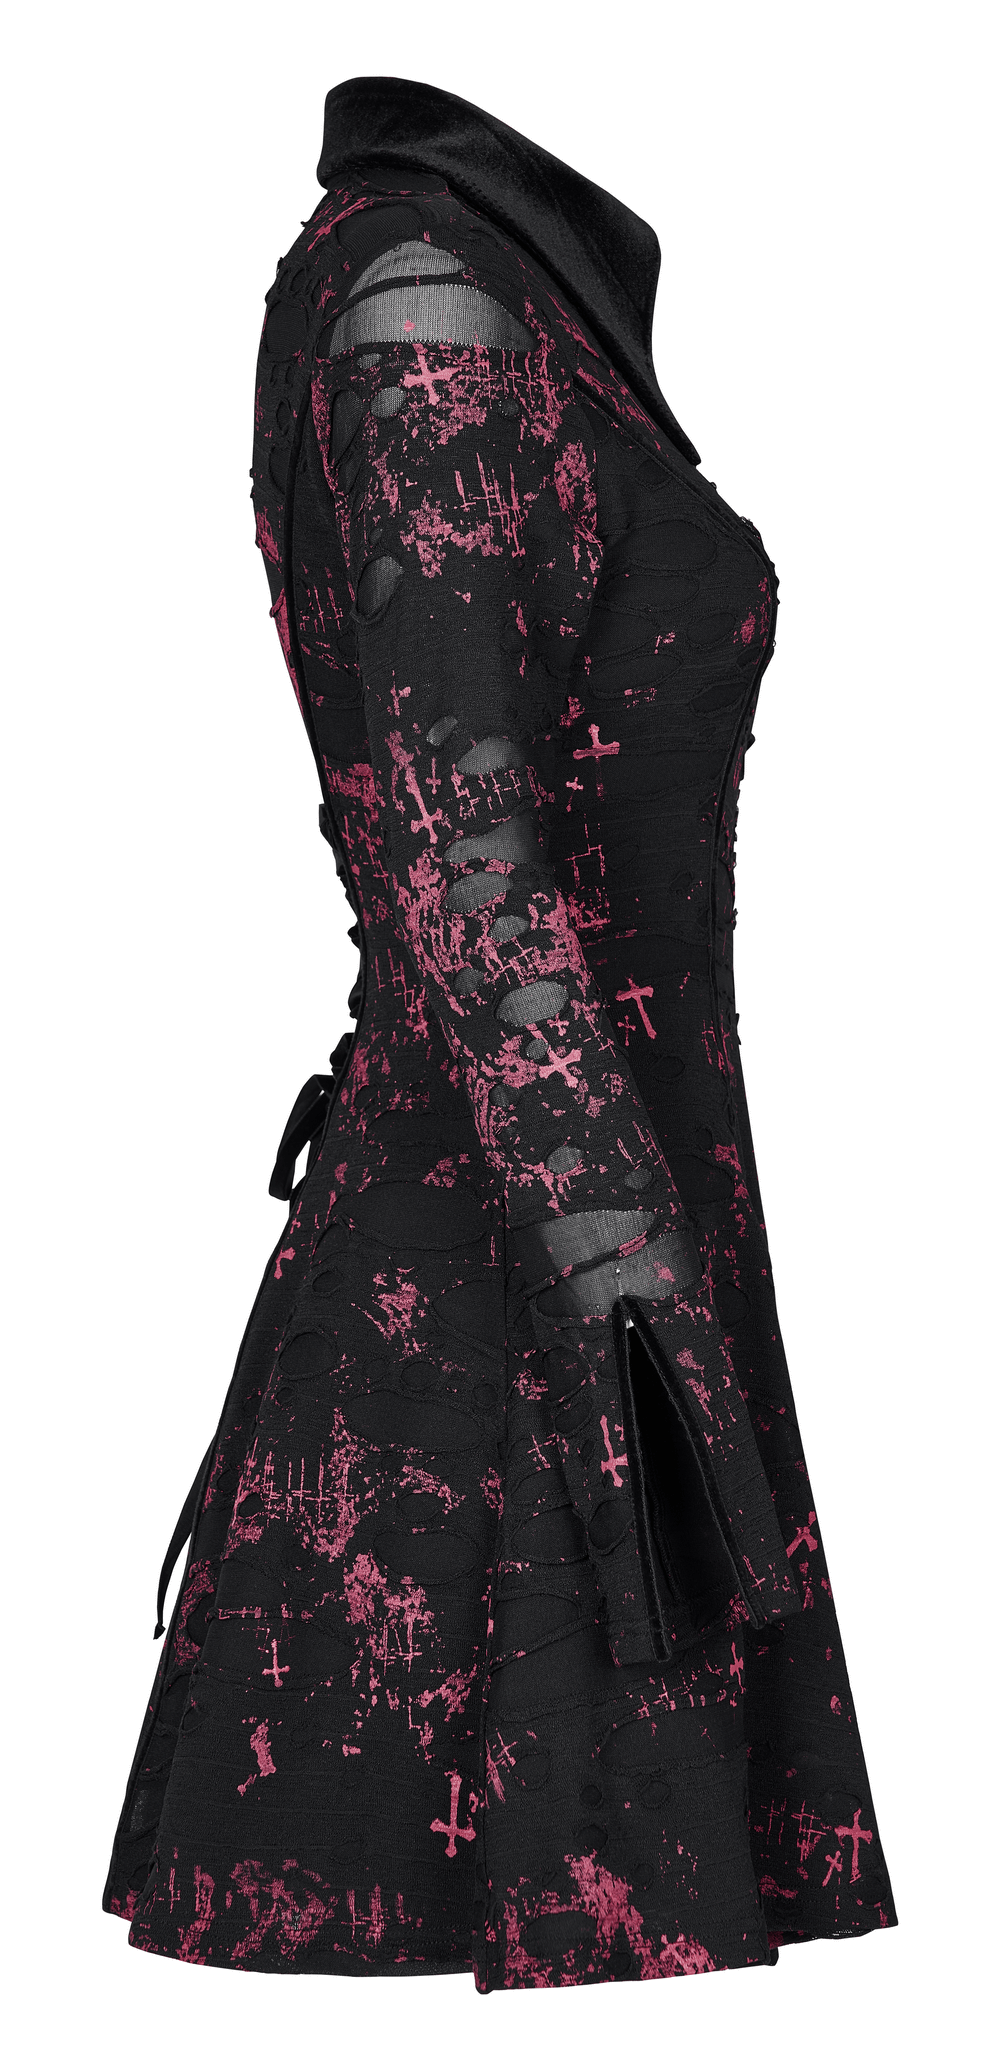 Splatter Print Gothic Dress with Zipper and Lace-Up Back - HARD'N'HEAVY